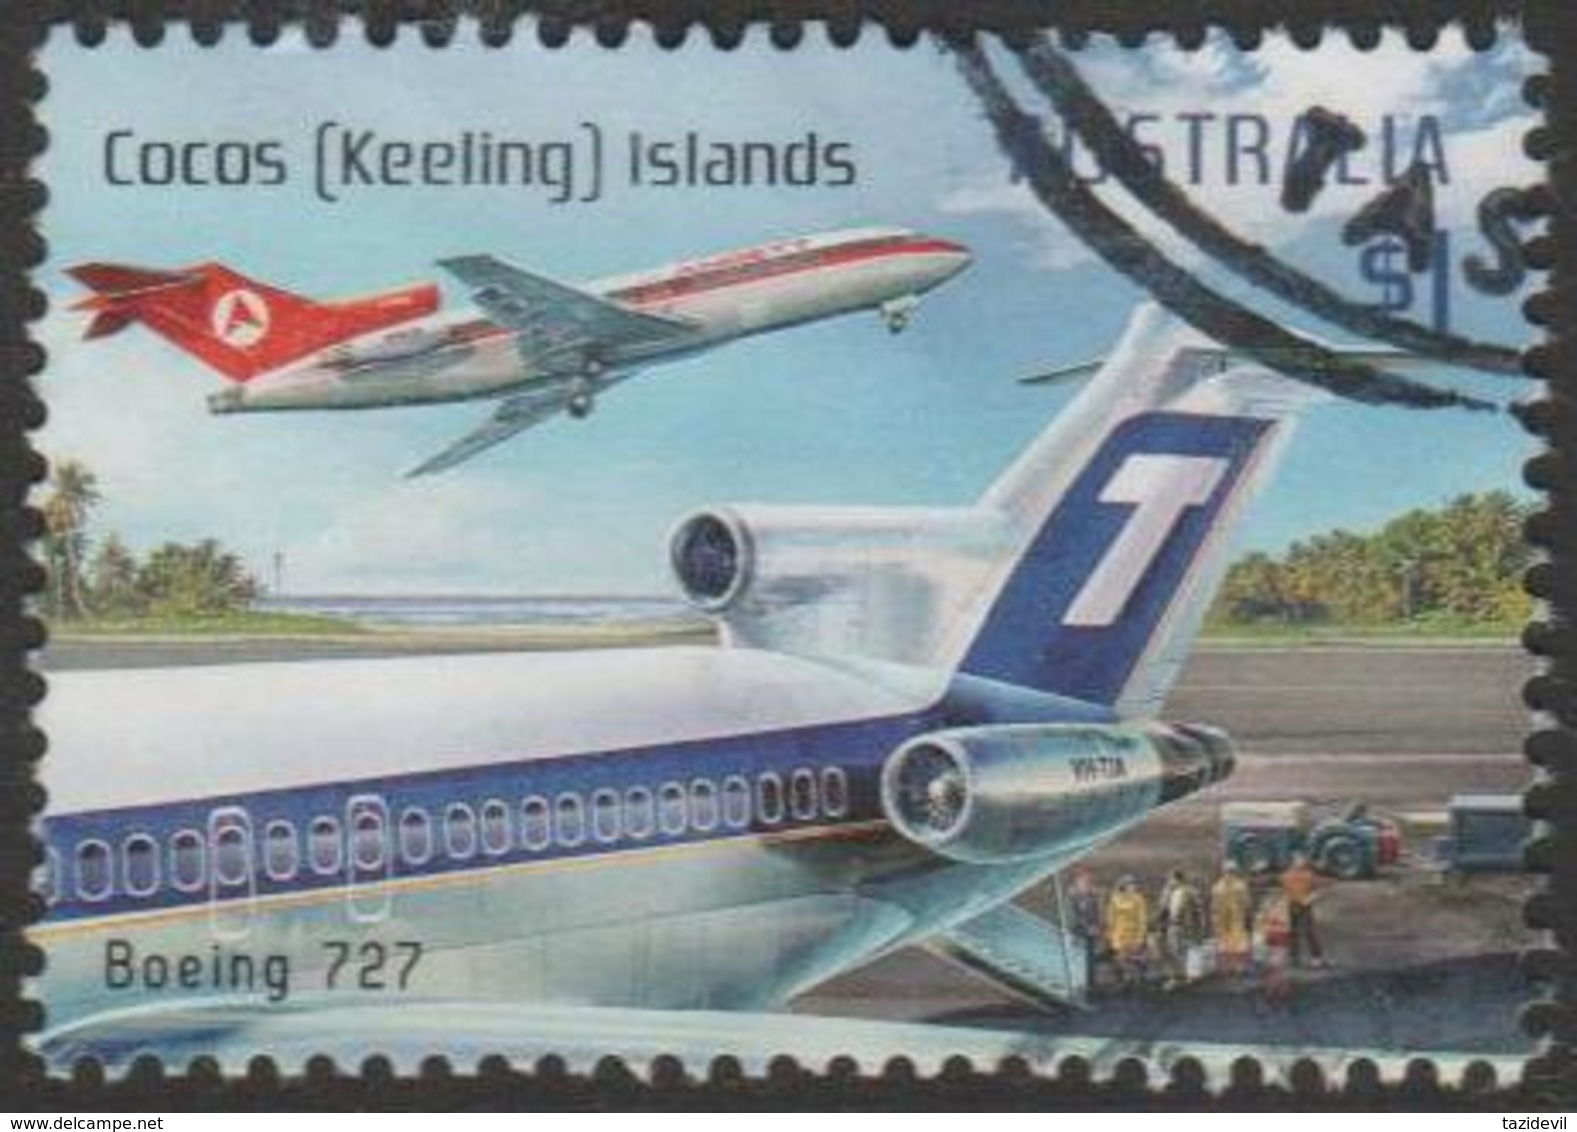 COCOS (KEELING) ISLANDS - USED 2017 $1.00 Aviation - Boeing 727 - Aircraft - Isole Cocos (Keeling)